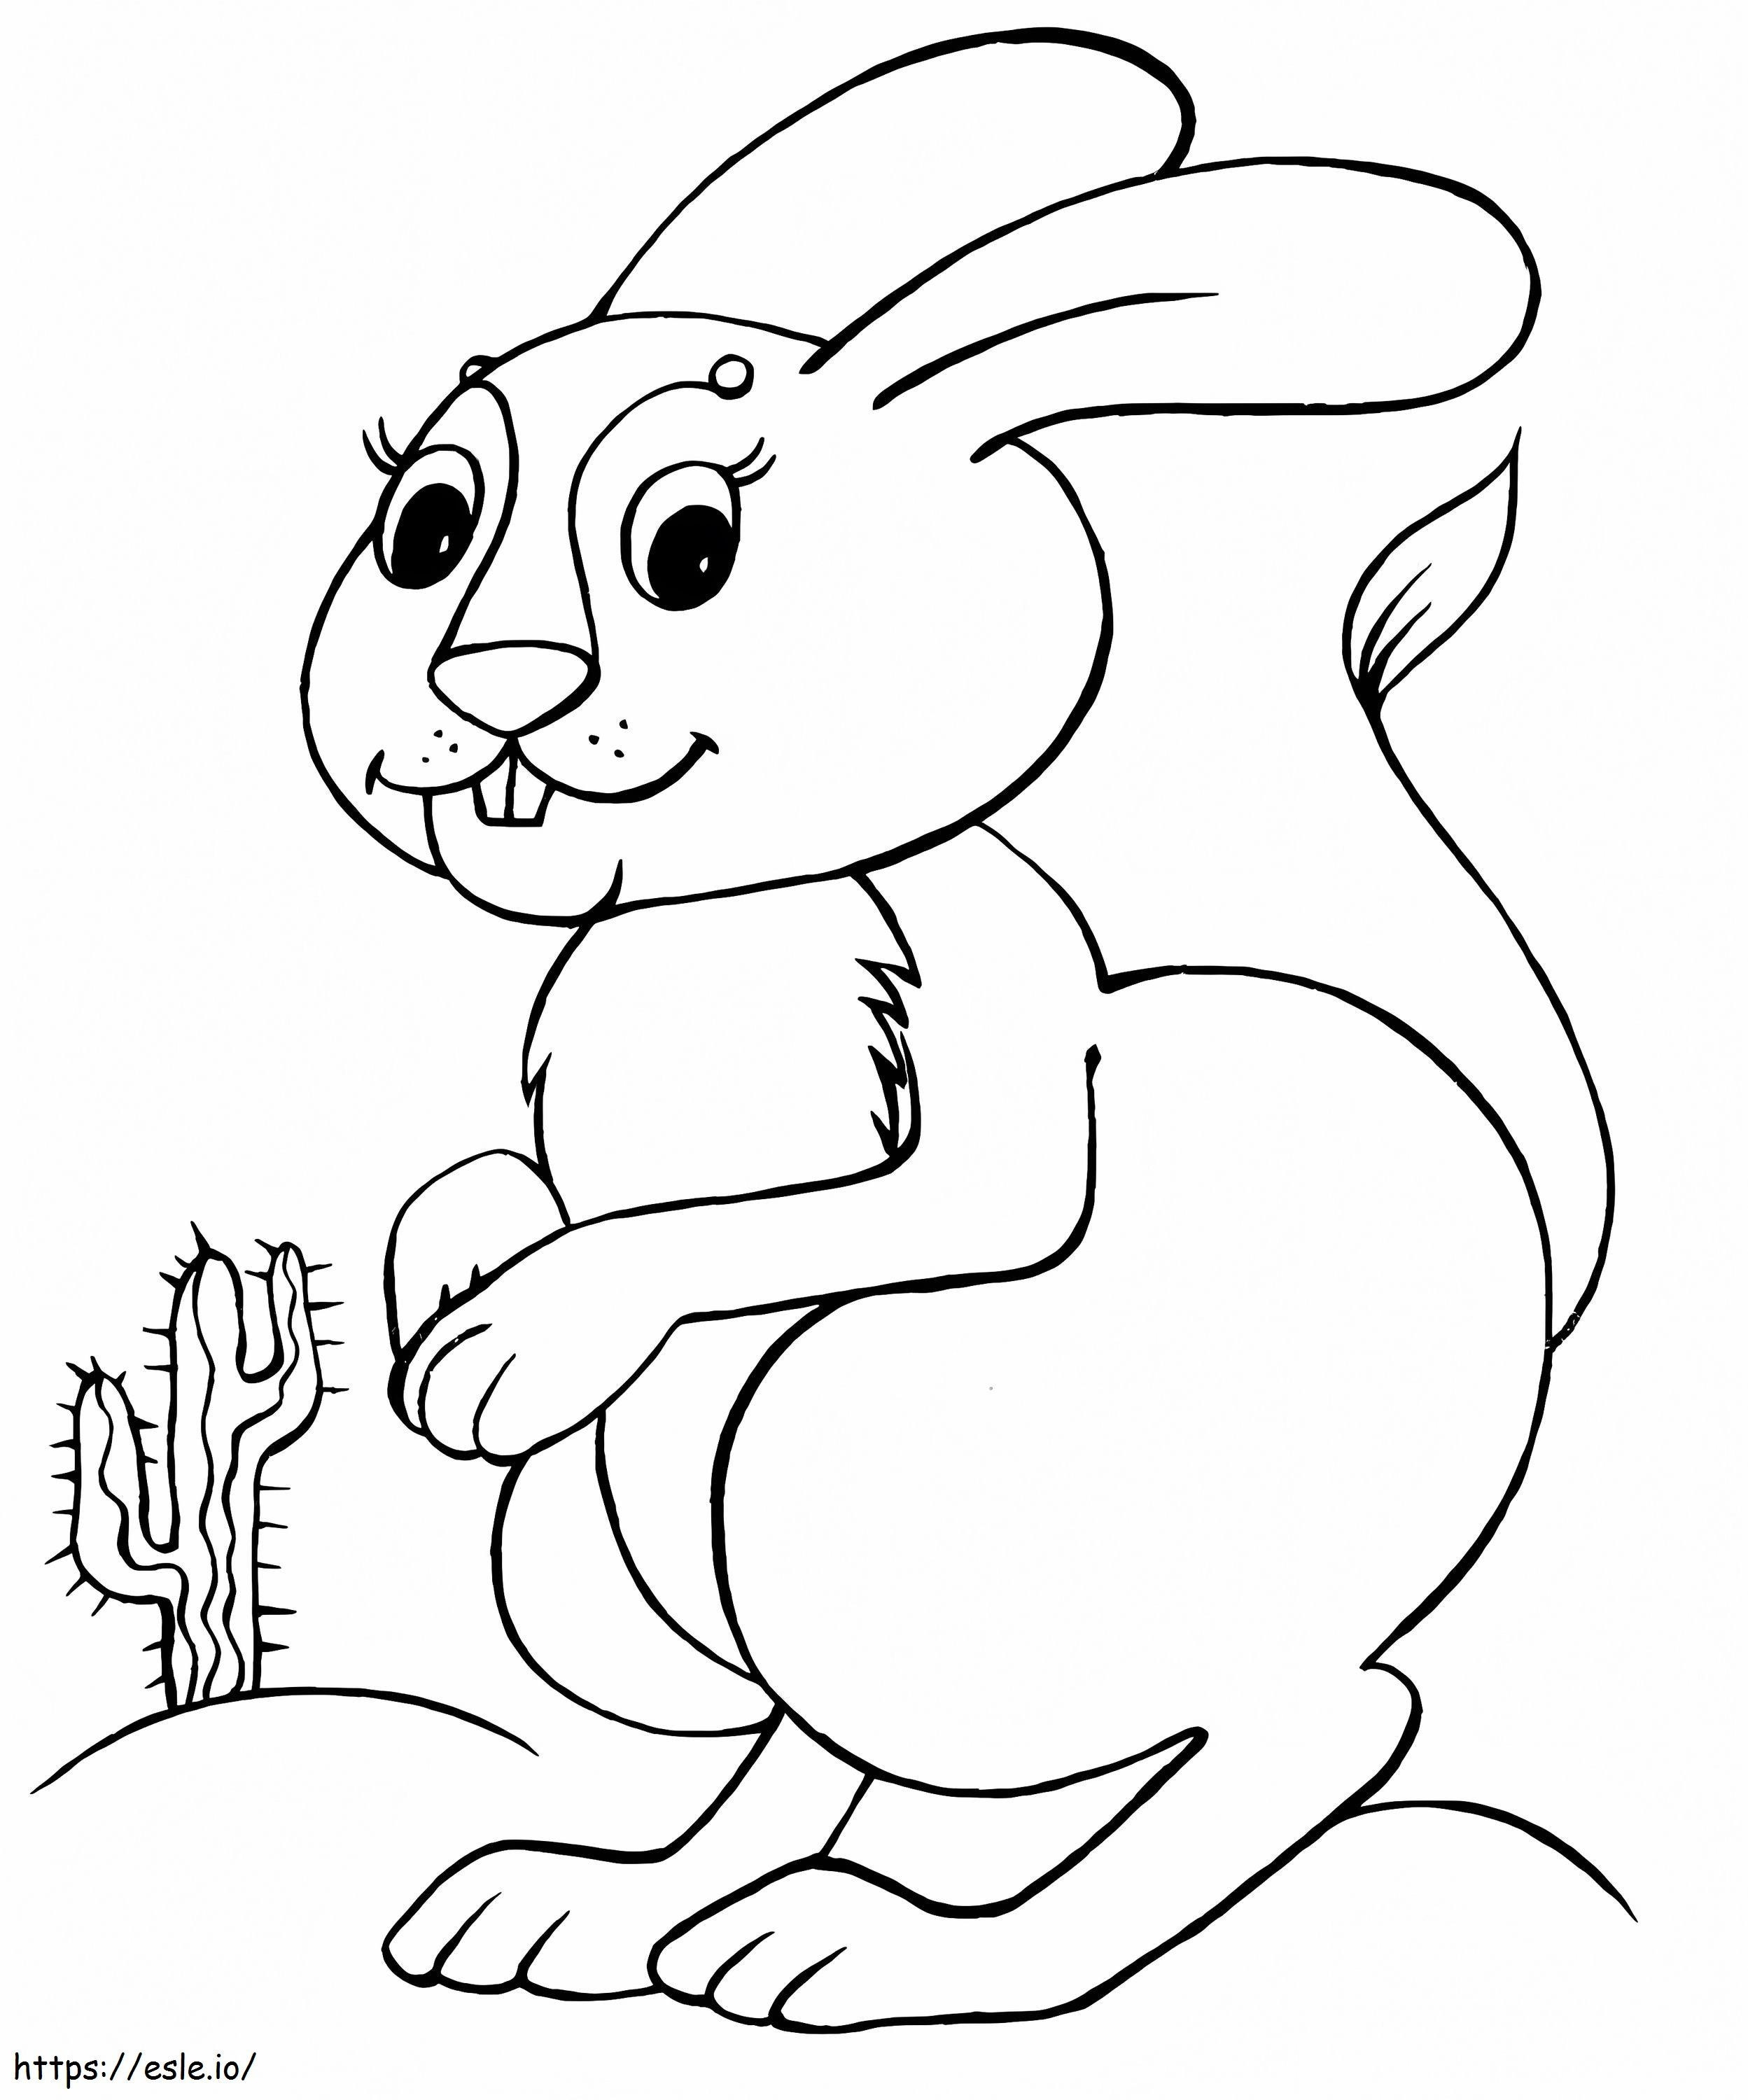 Lapin And Saguaro Cactus coloring page